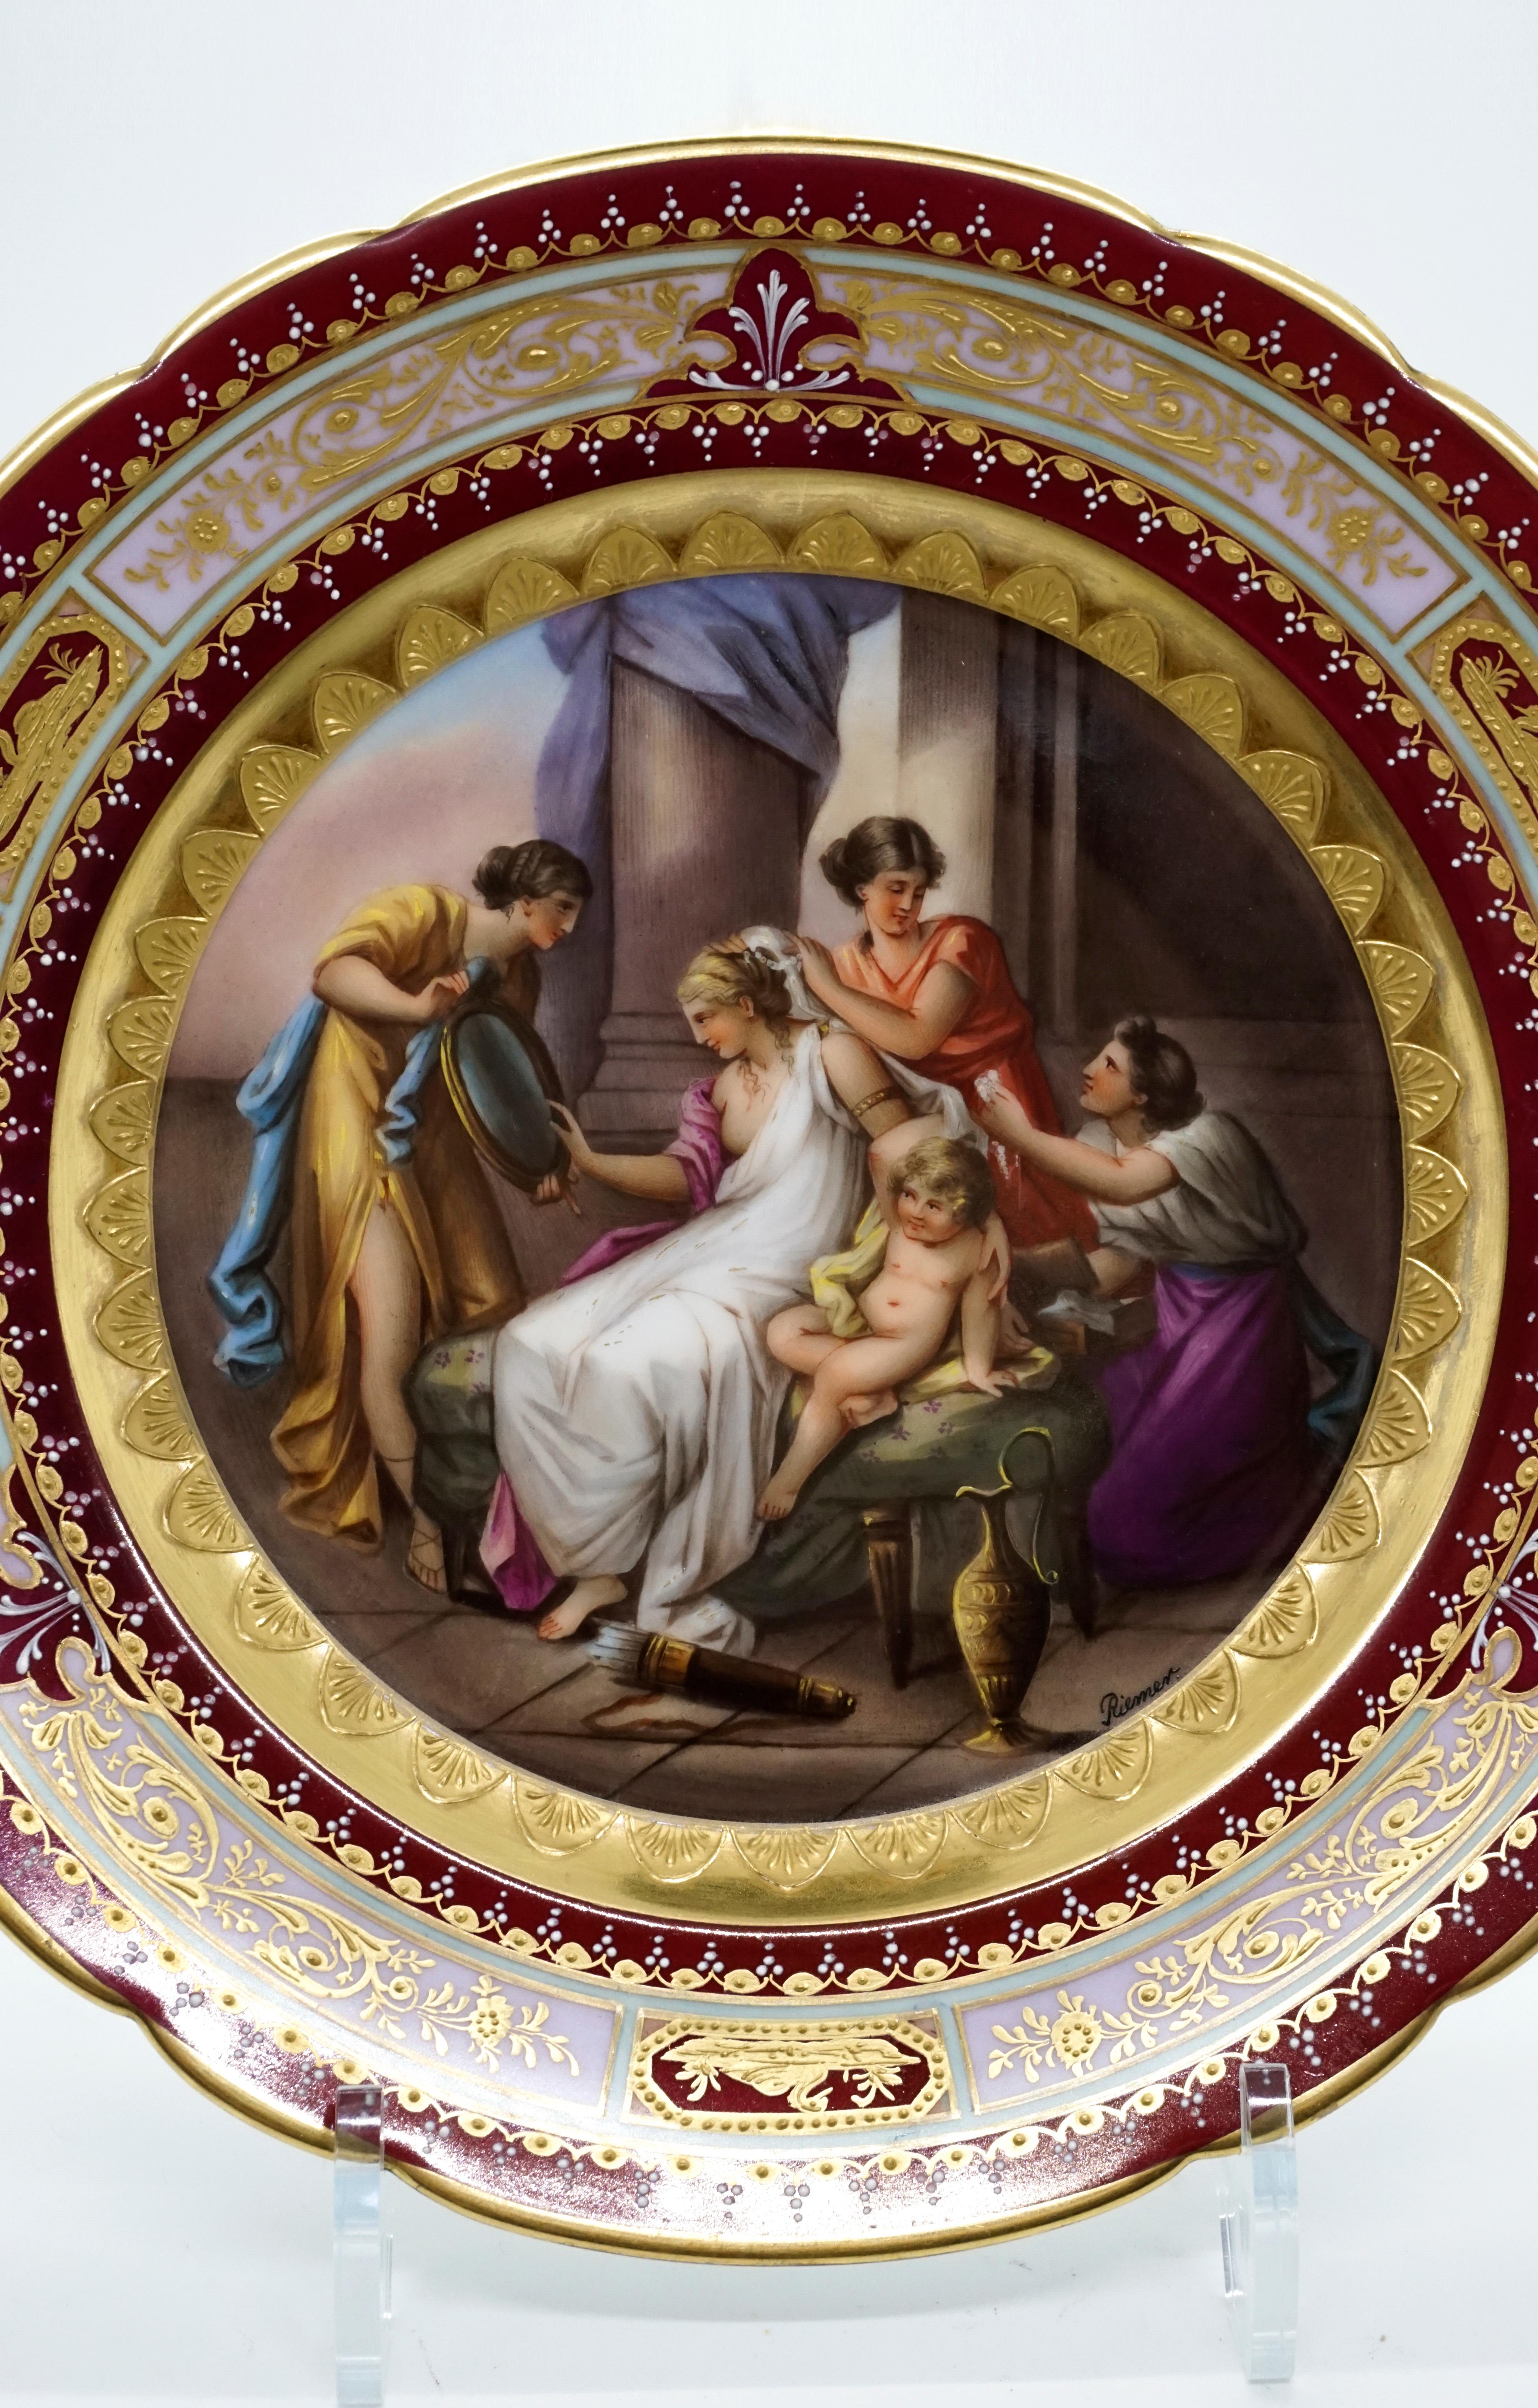 Elaborately painted porcelain picture plate: plate rim with notches, gold rim on the outside, ruby red flag, gold and white framed light green ribbon with three large, gold framed reserves with a pink background, filled with gold feather tendrils